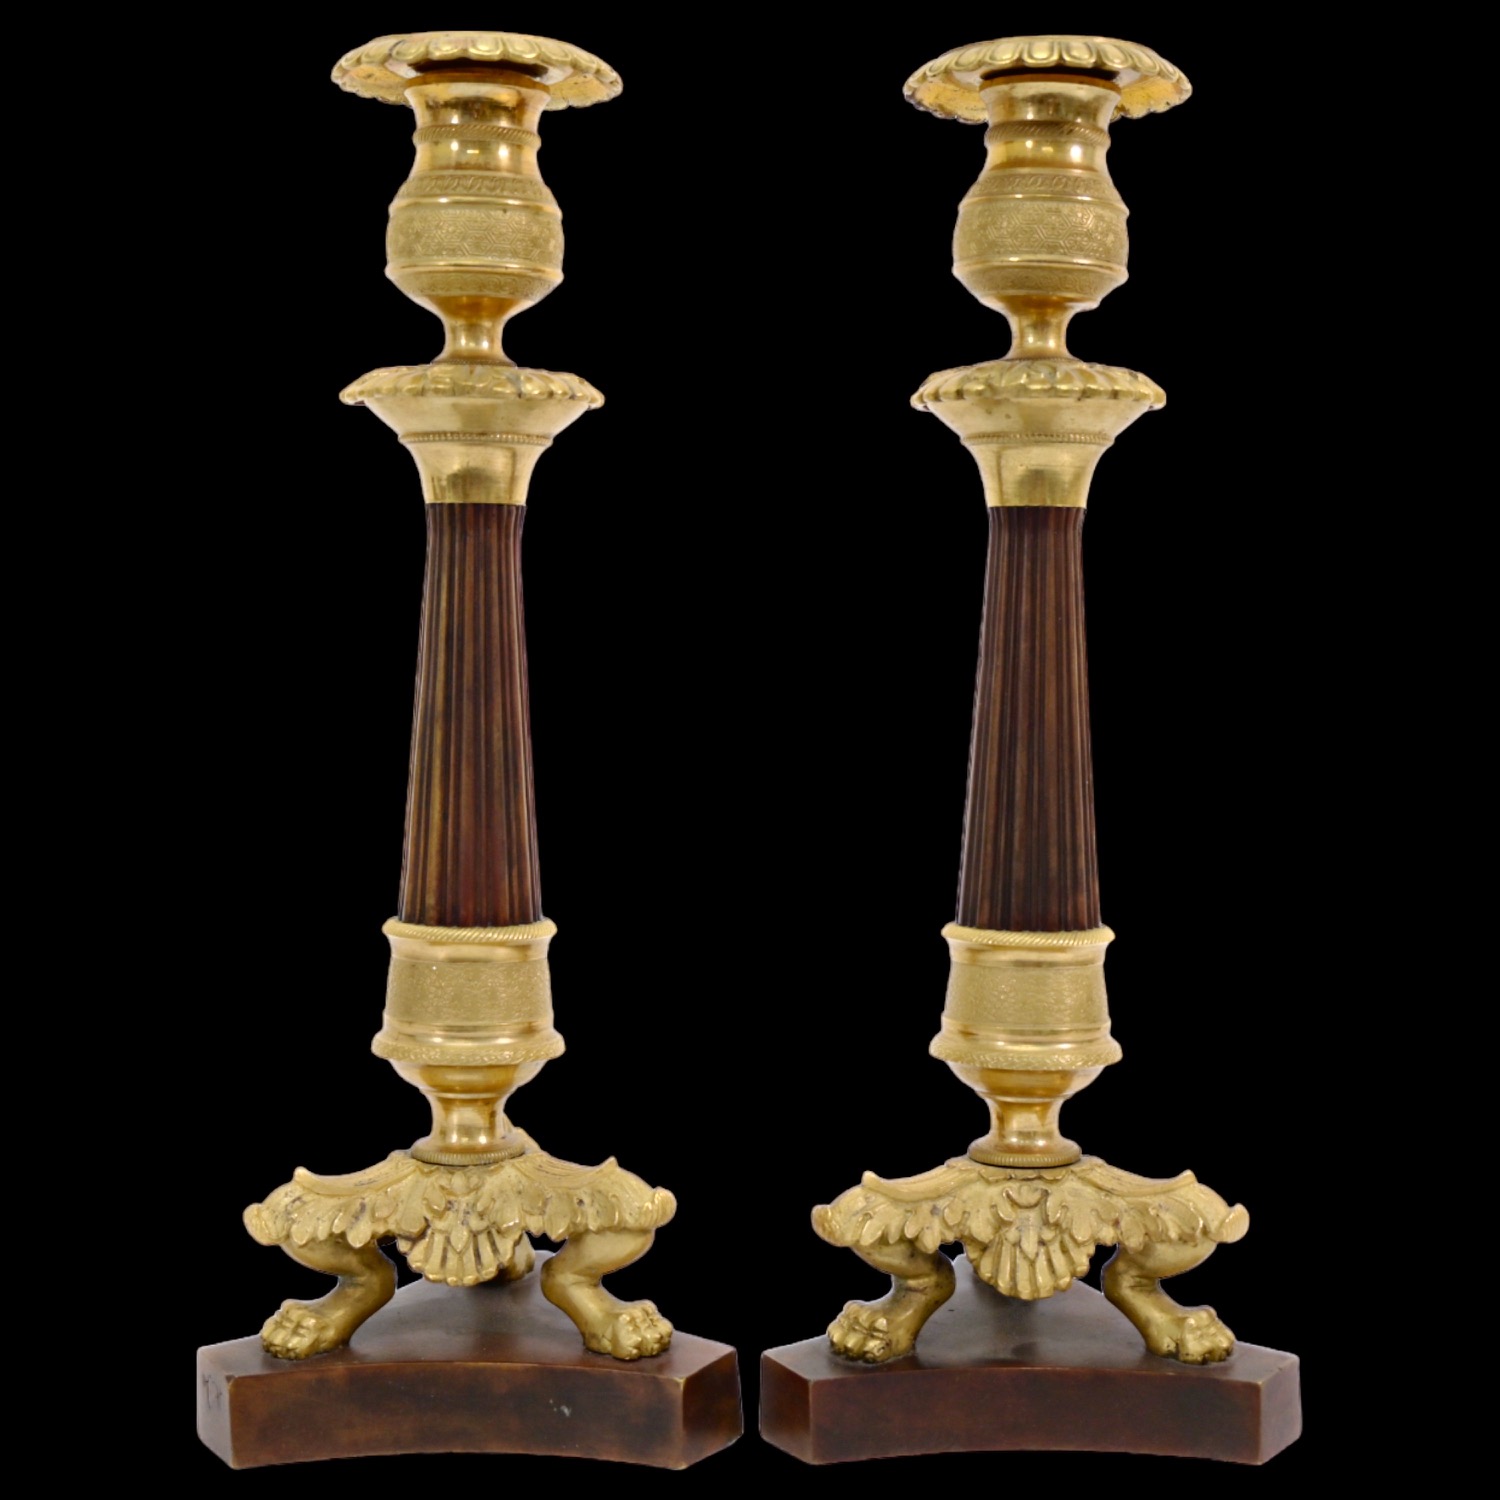 Pair of candlesticks in gilded bronze and wood, France, 19th century, collectibles and home decor. - Image 3 of 9